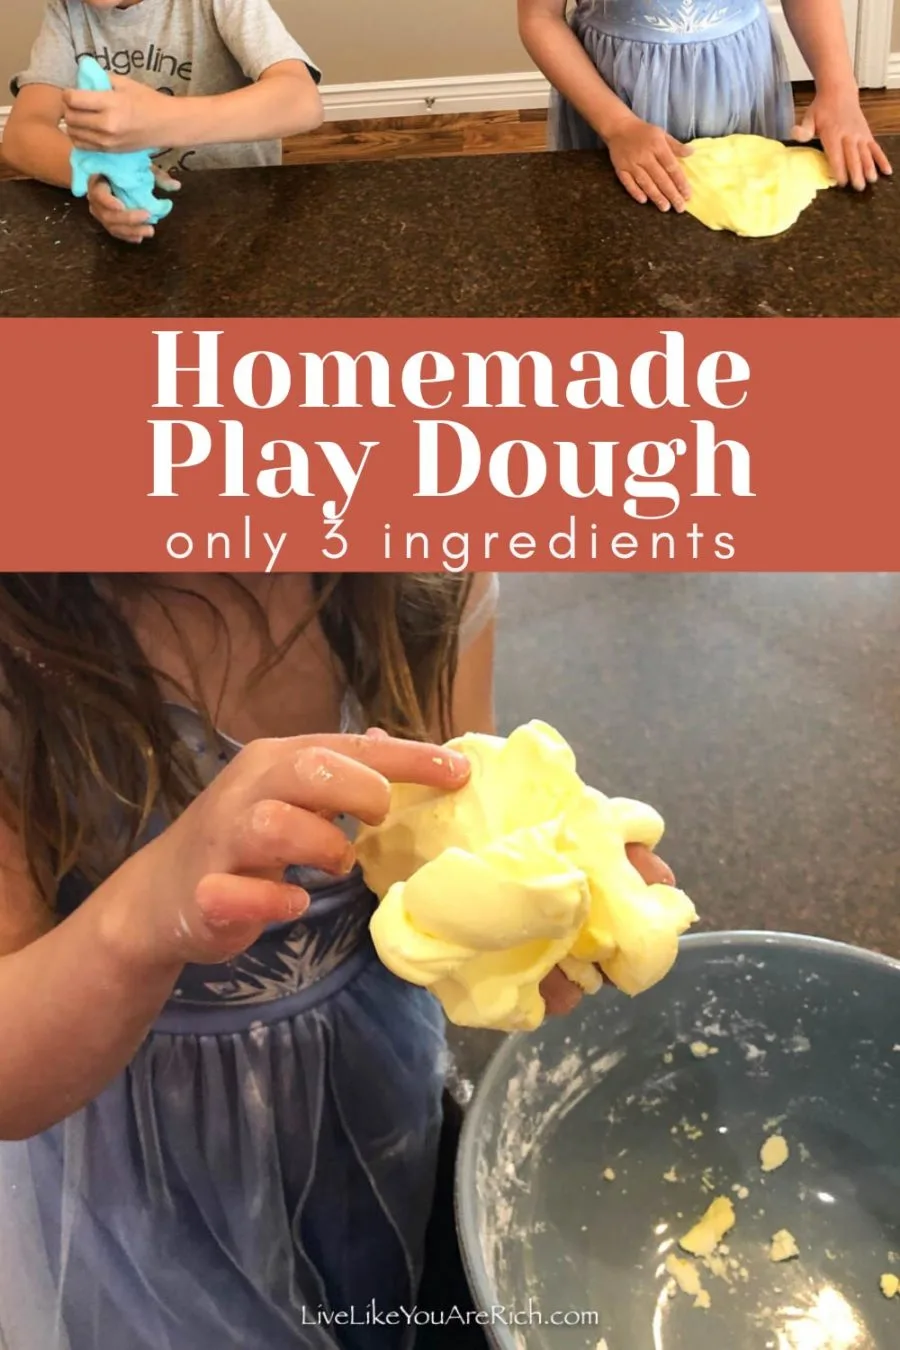 If you are looking for a FUN quick activity to do with kids, this 1 minute homemade play dough is a fun sensory project that will keep kids entertained for hours. It only requires 3 common household ingredients is easy, quick to make, nice to touch and inexpensive. #activitiesforkids #kidsactivities #playdough